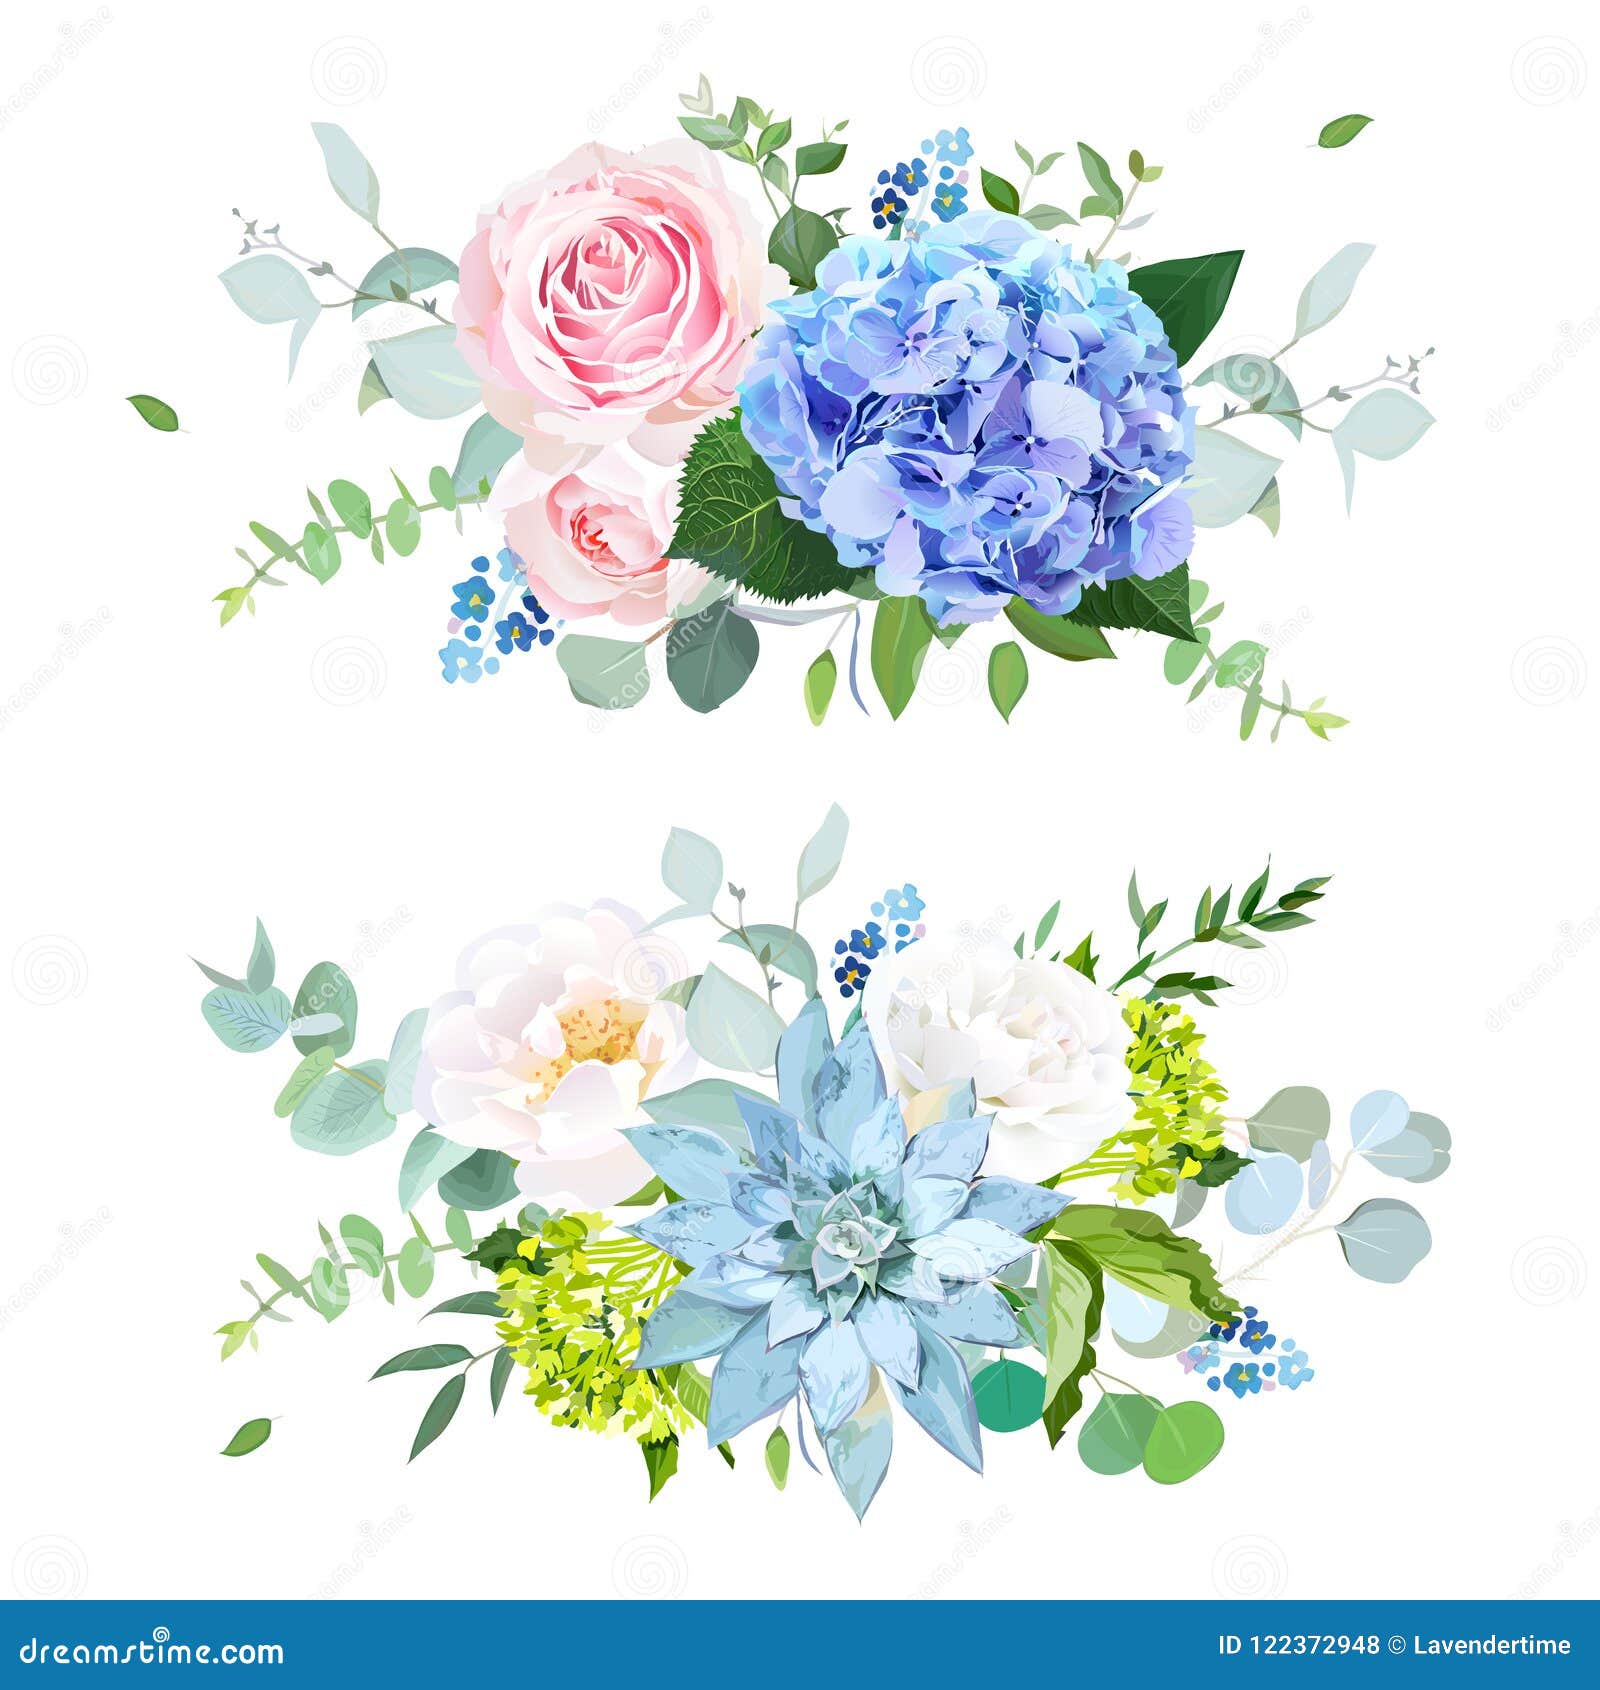 light blue, green hydrangea, pink, white rose, succulent, forget